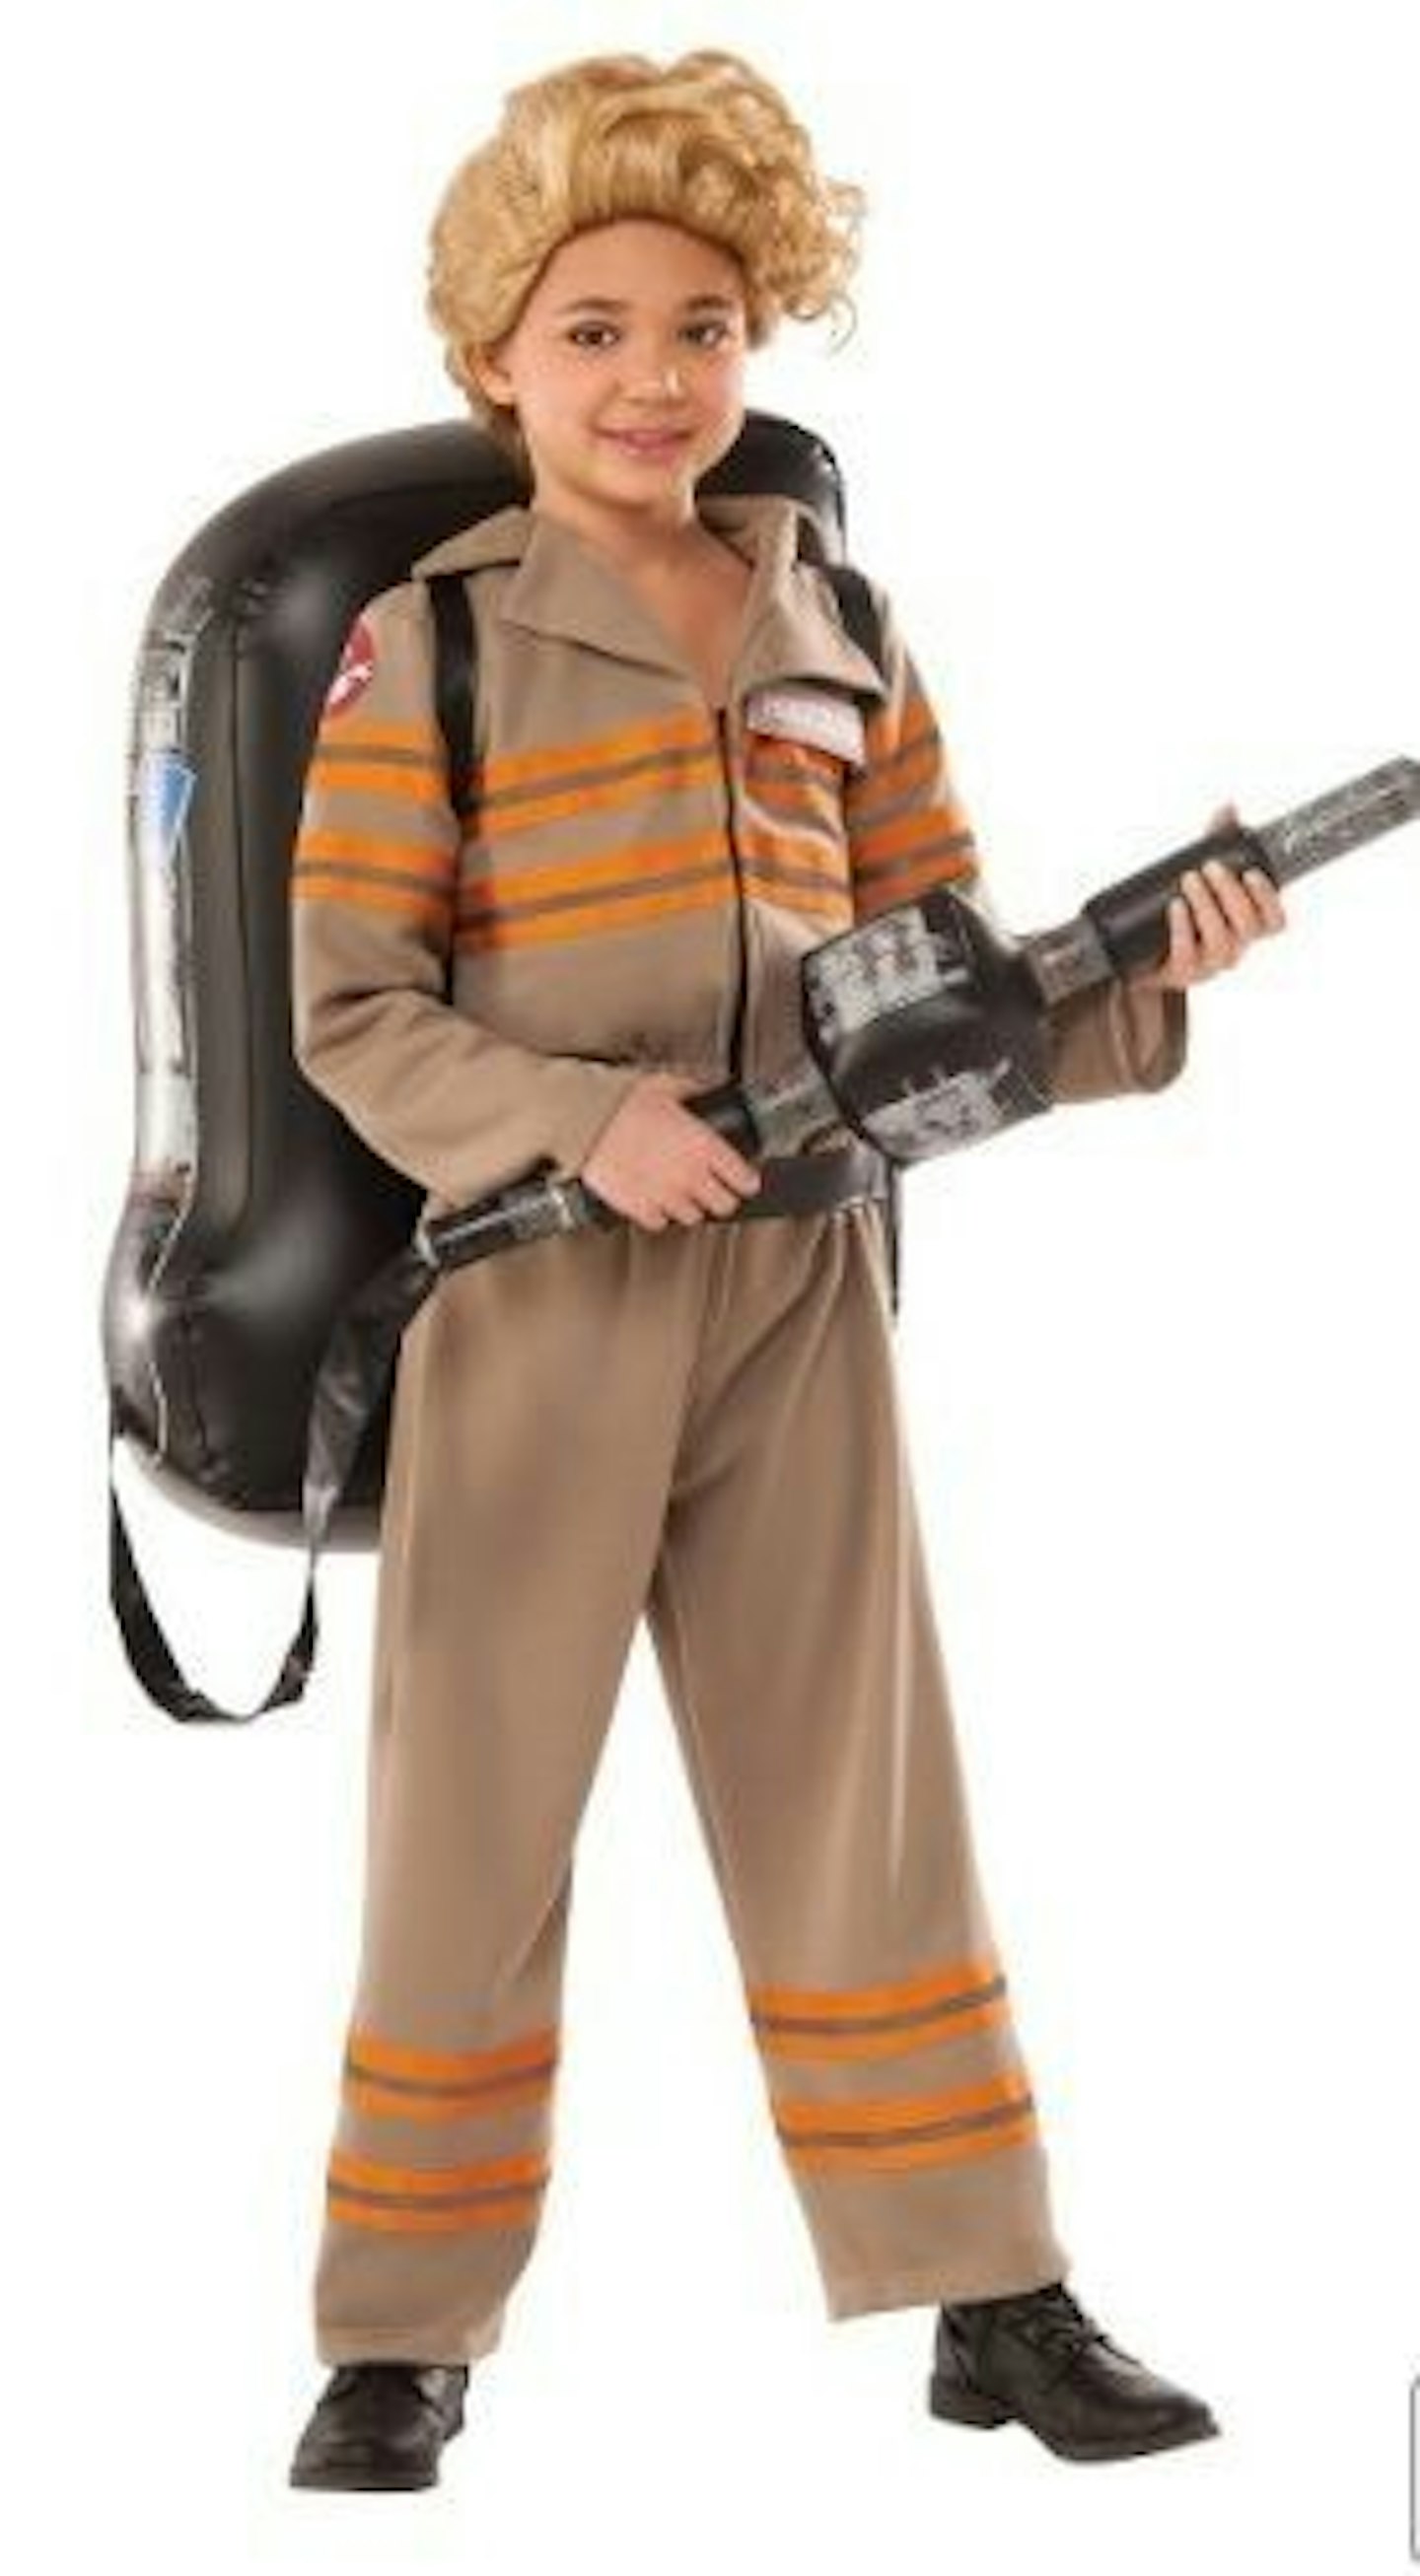 Ghostbuster outfit